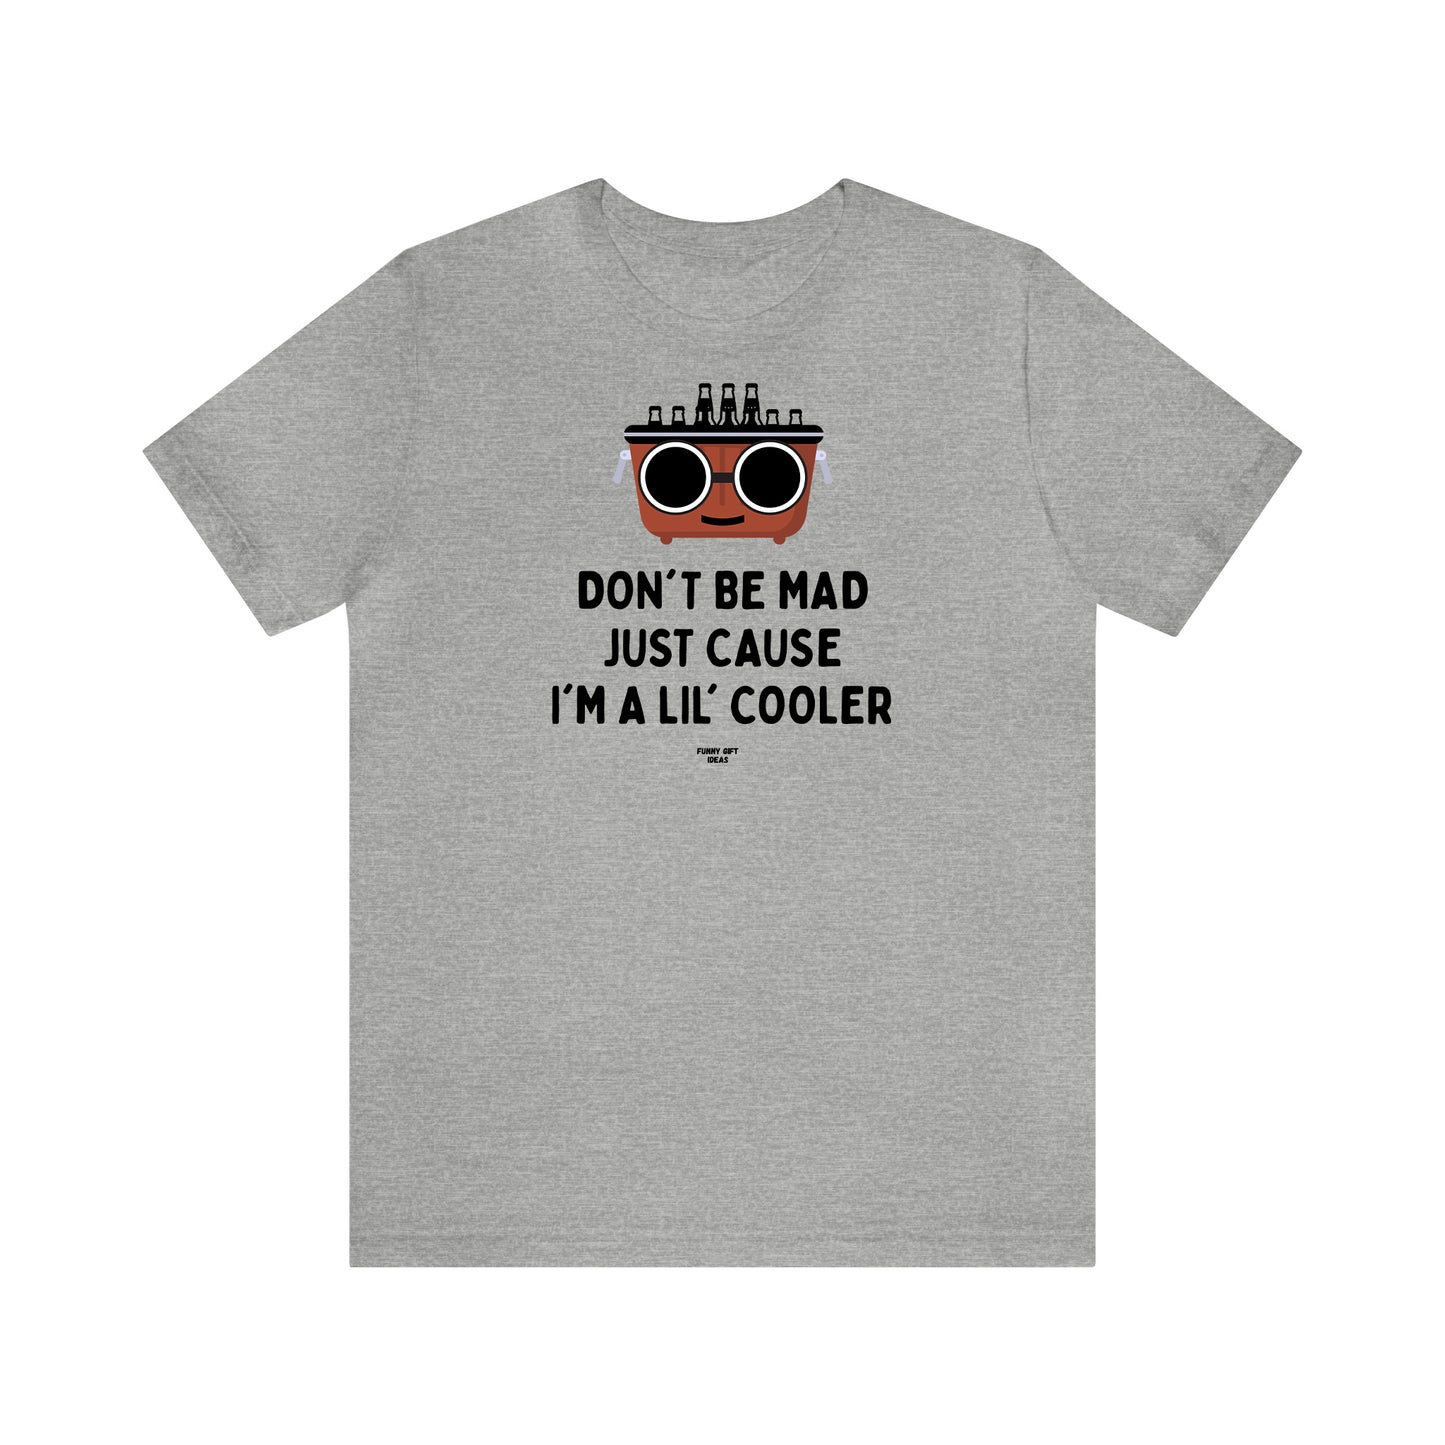 Mens T Shirts - Don't Be Mad Just Cause I'm a Lil' Cooler - Funny Men T Shirts